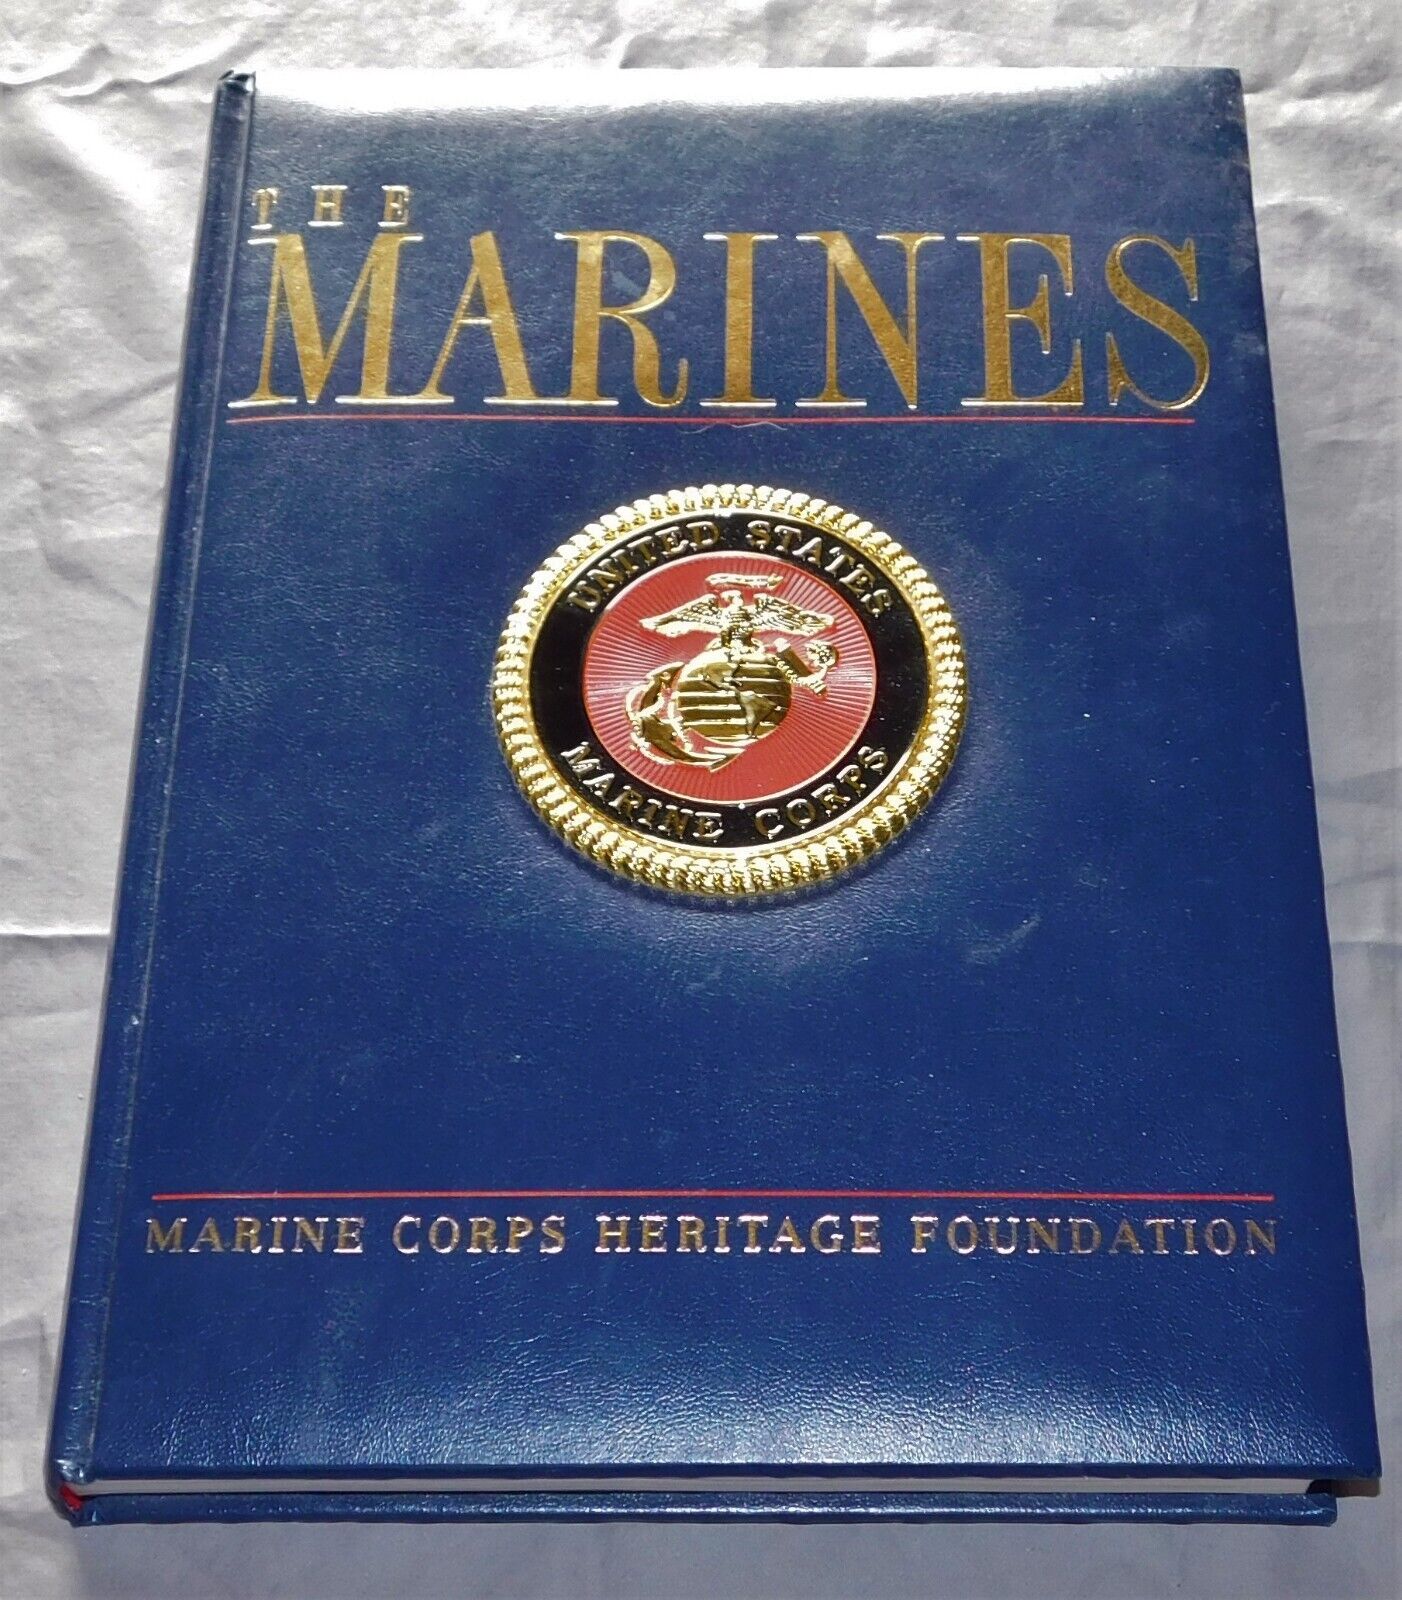 The Marines, pub by the Marine Corps Heritage Foundation, Beaux Arts Ed, 2012